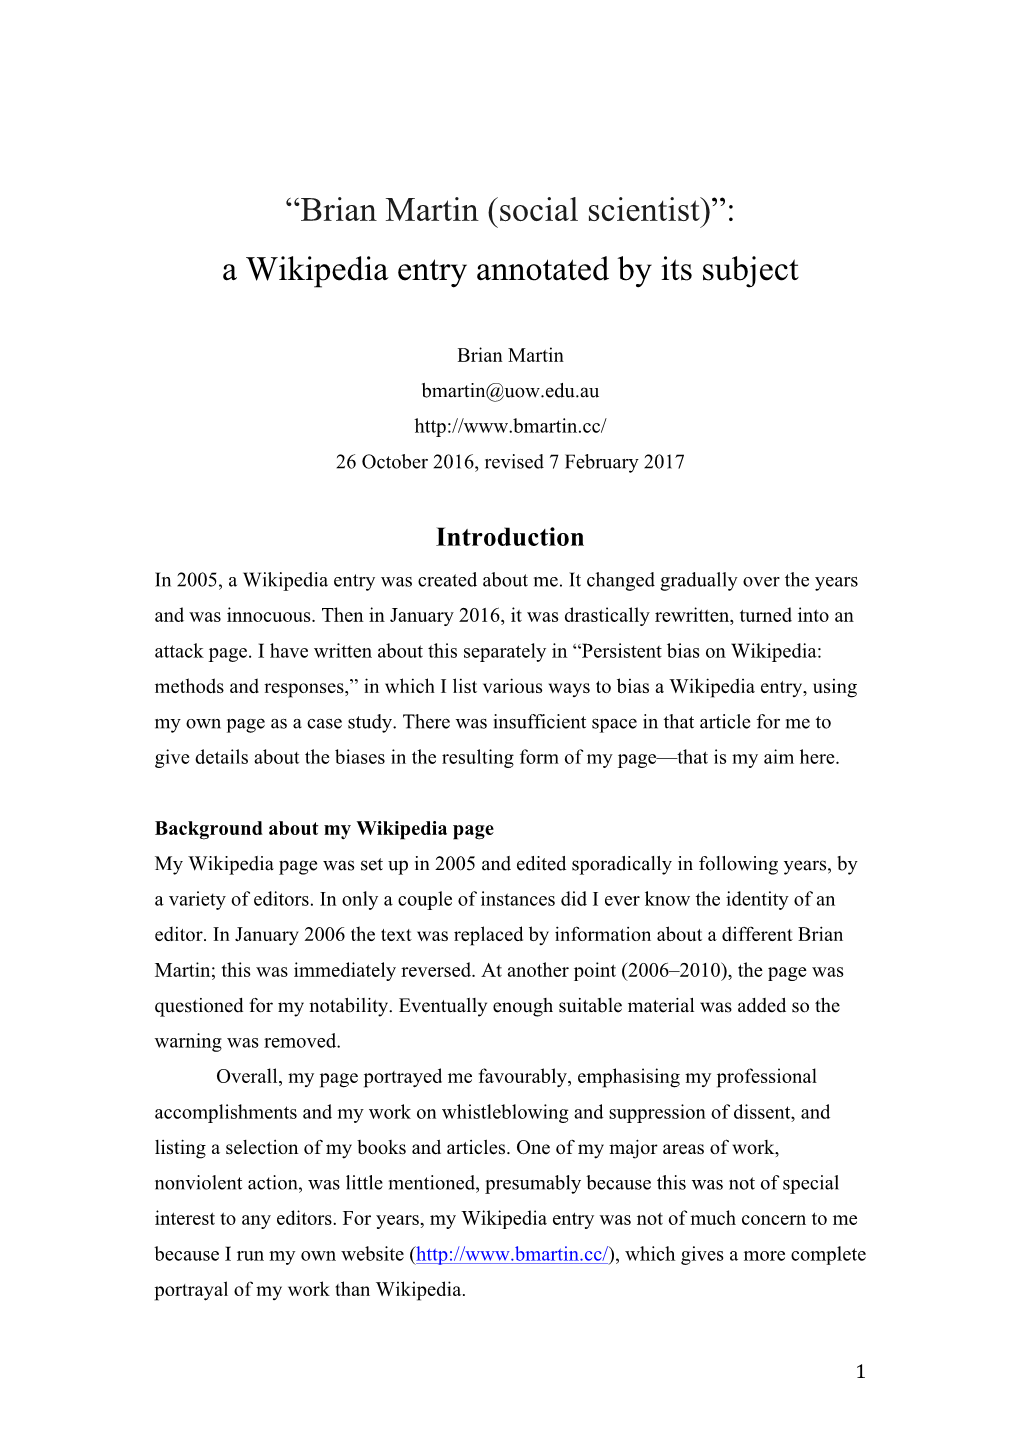 Brian Martin (Social Scientist): a Wikipedia Entry Annotated by Its